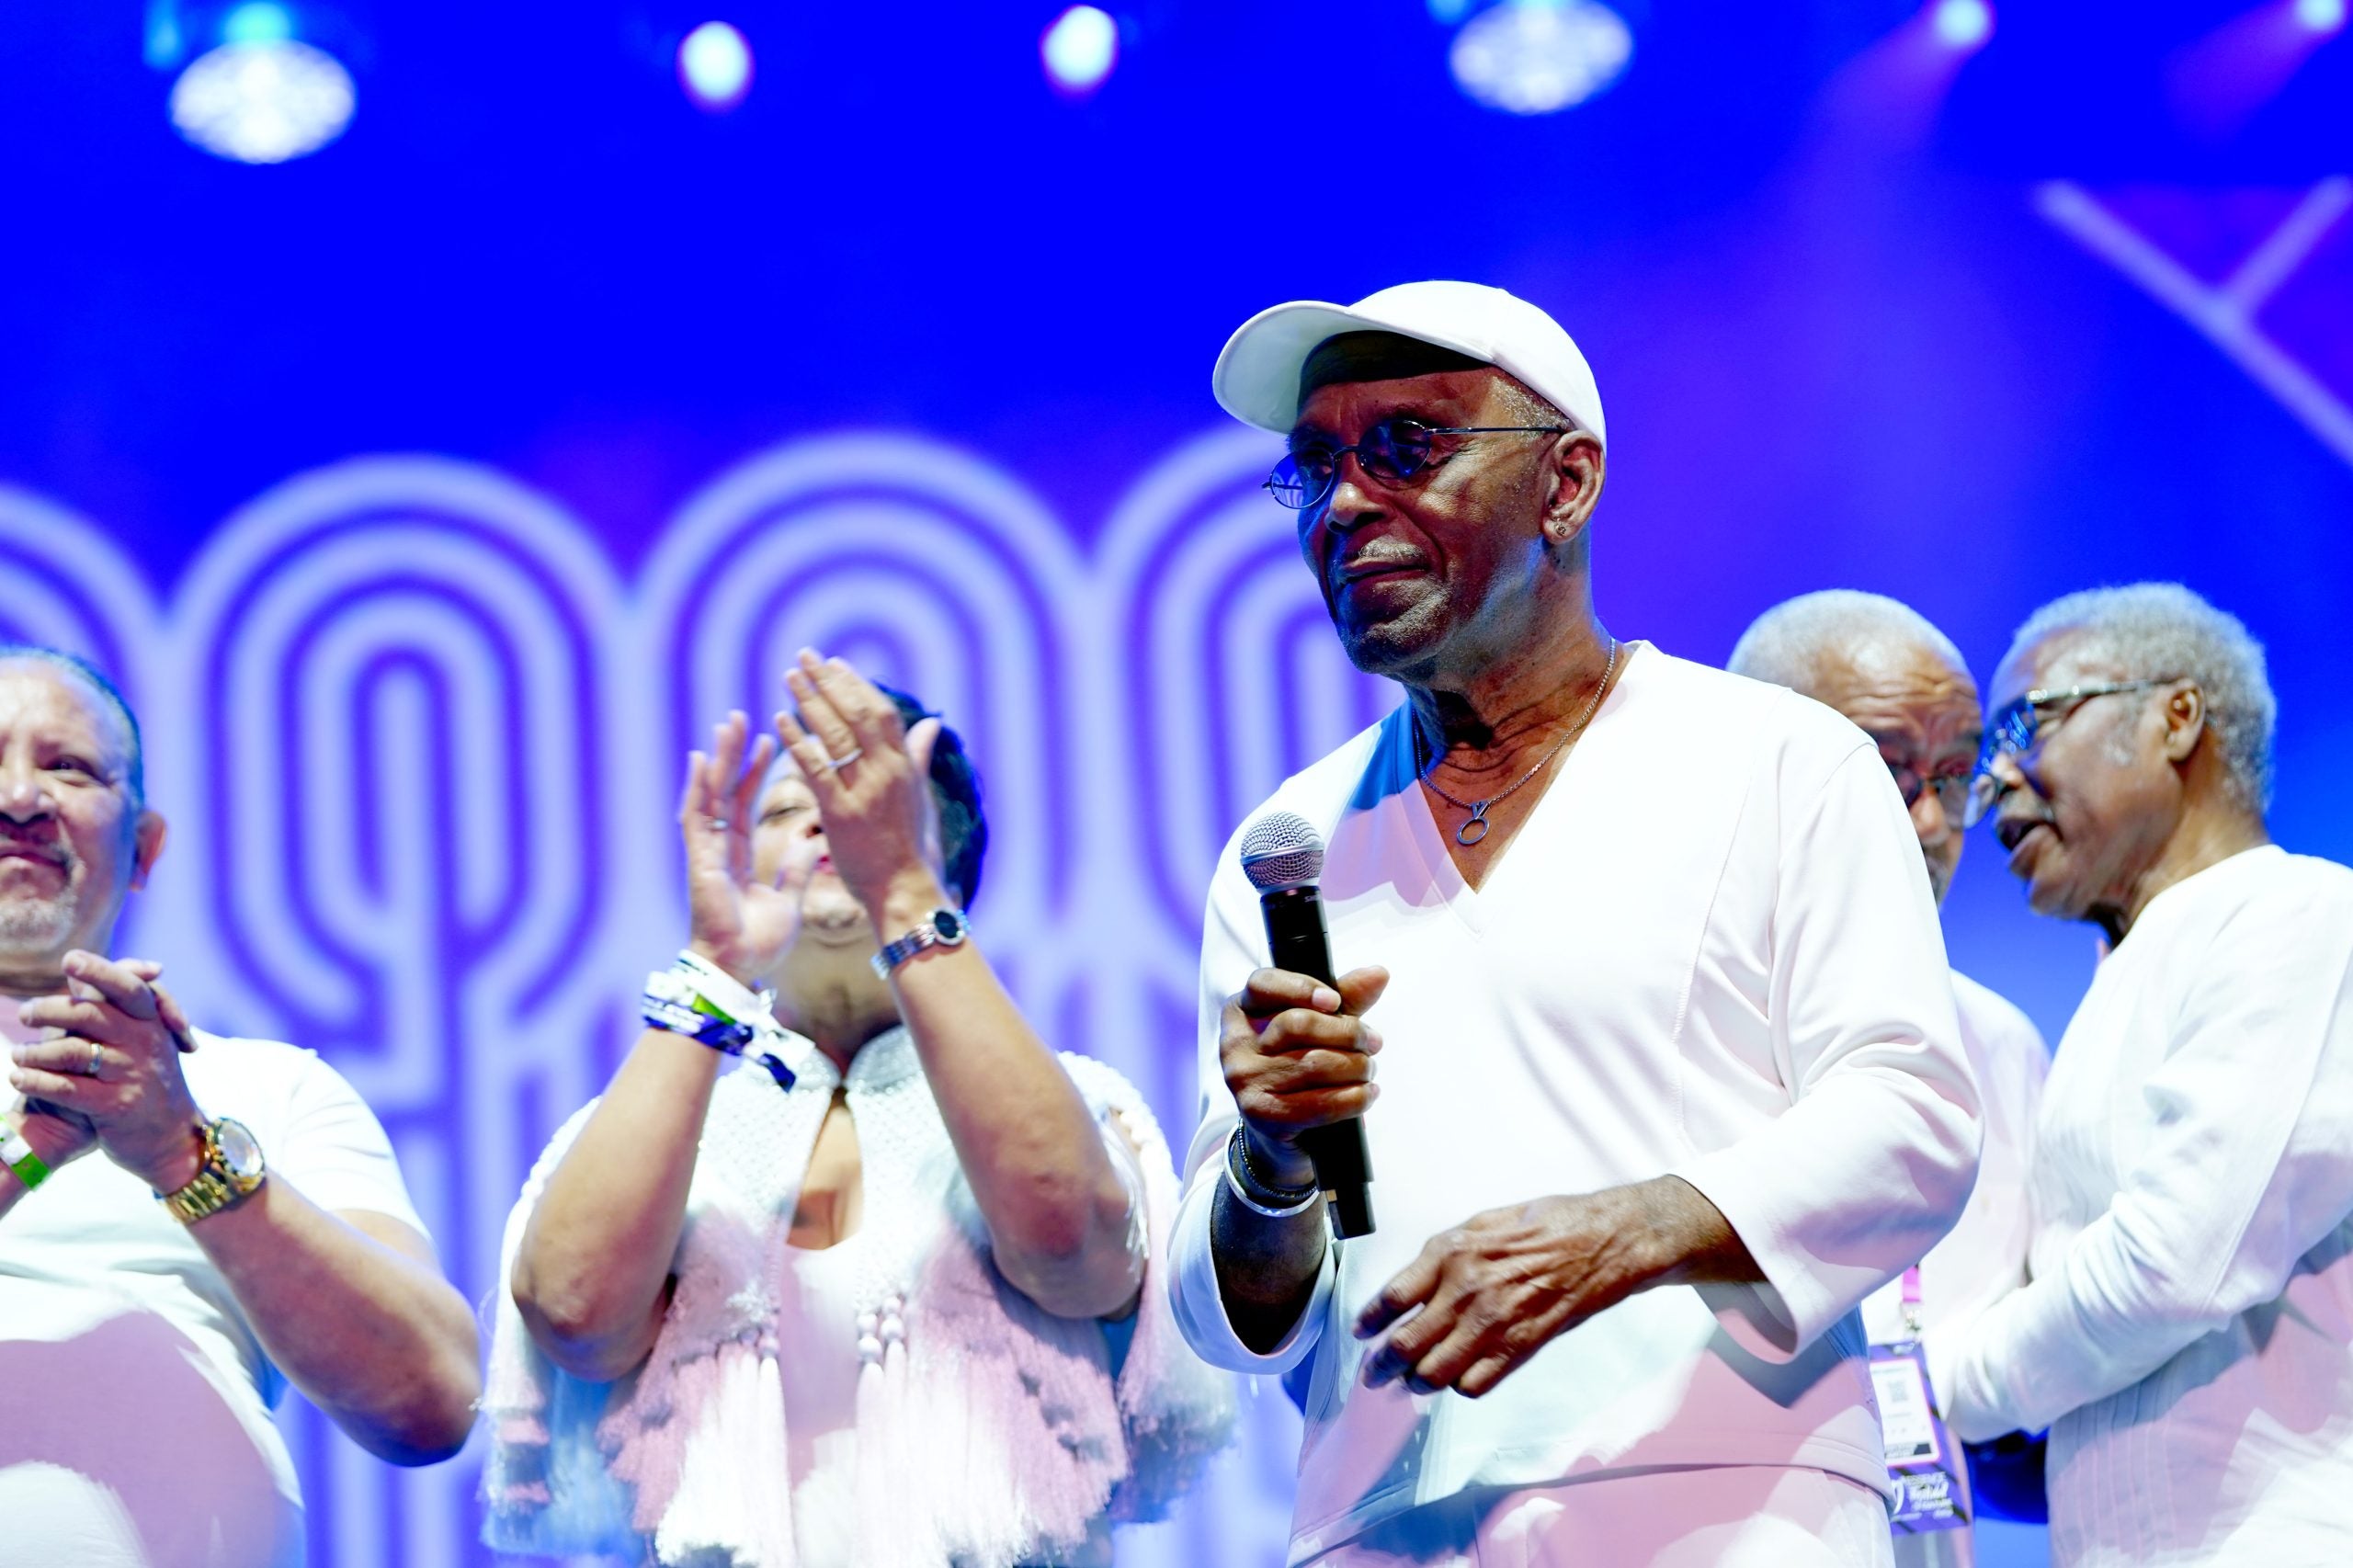 Frankie Beverly Takes His Final Bow At ESSENCE Festival Of Culture